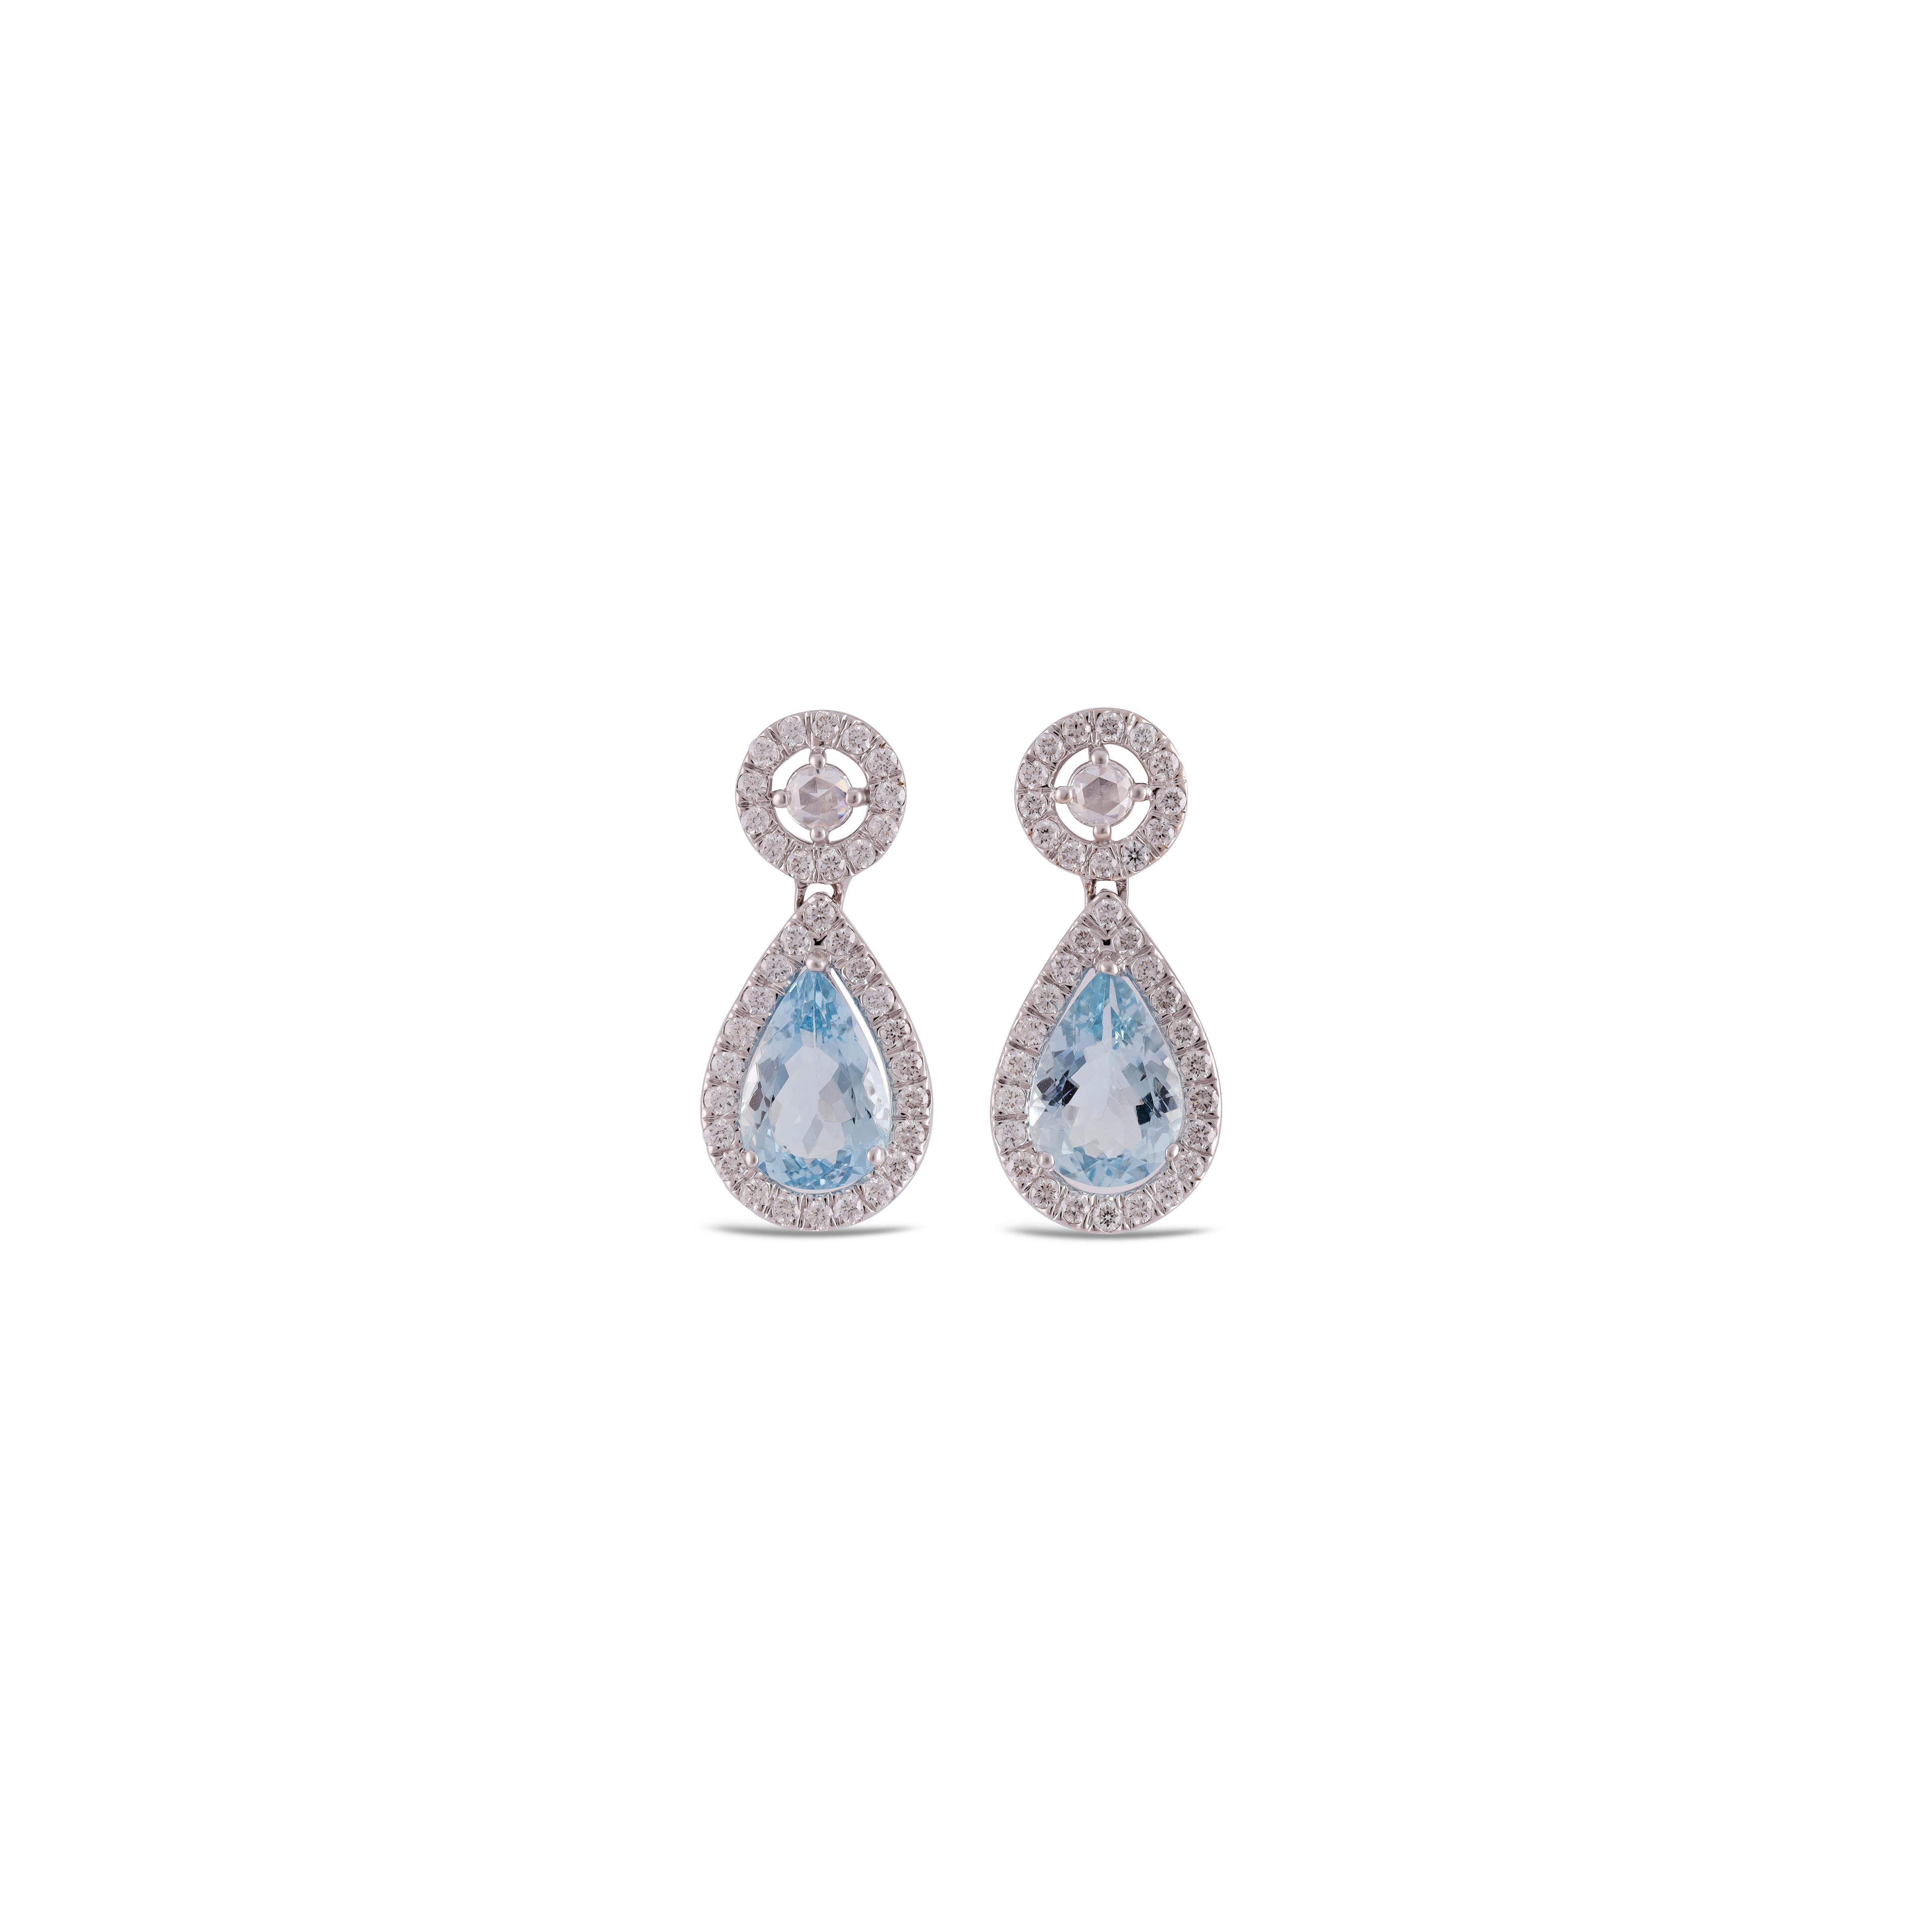 This is an elegant Aquamarine & diamond Earring studded in 18k gold with 2 piece of Pear 0r Drop Cut  shaped  Aquamarine weight 3.87 carat which is surrounded by 72 pieces of round shaped diamonds weight 1.53 carat, this entire ring studded in 18k